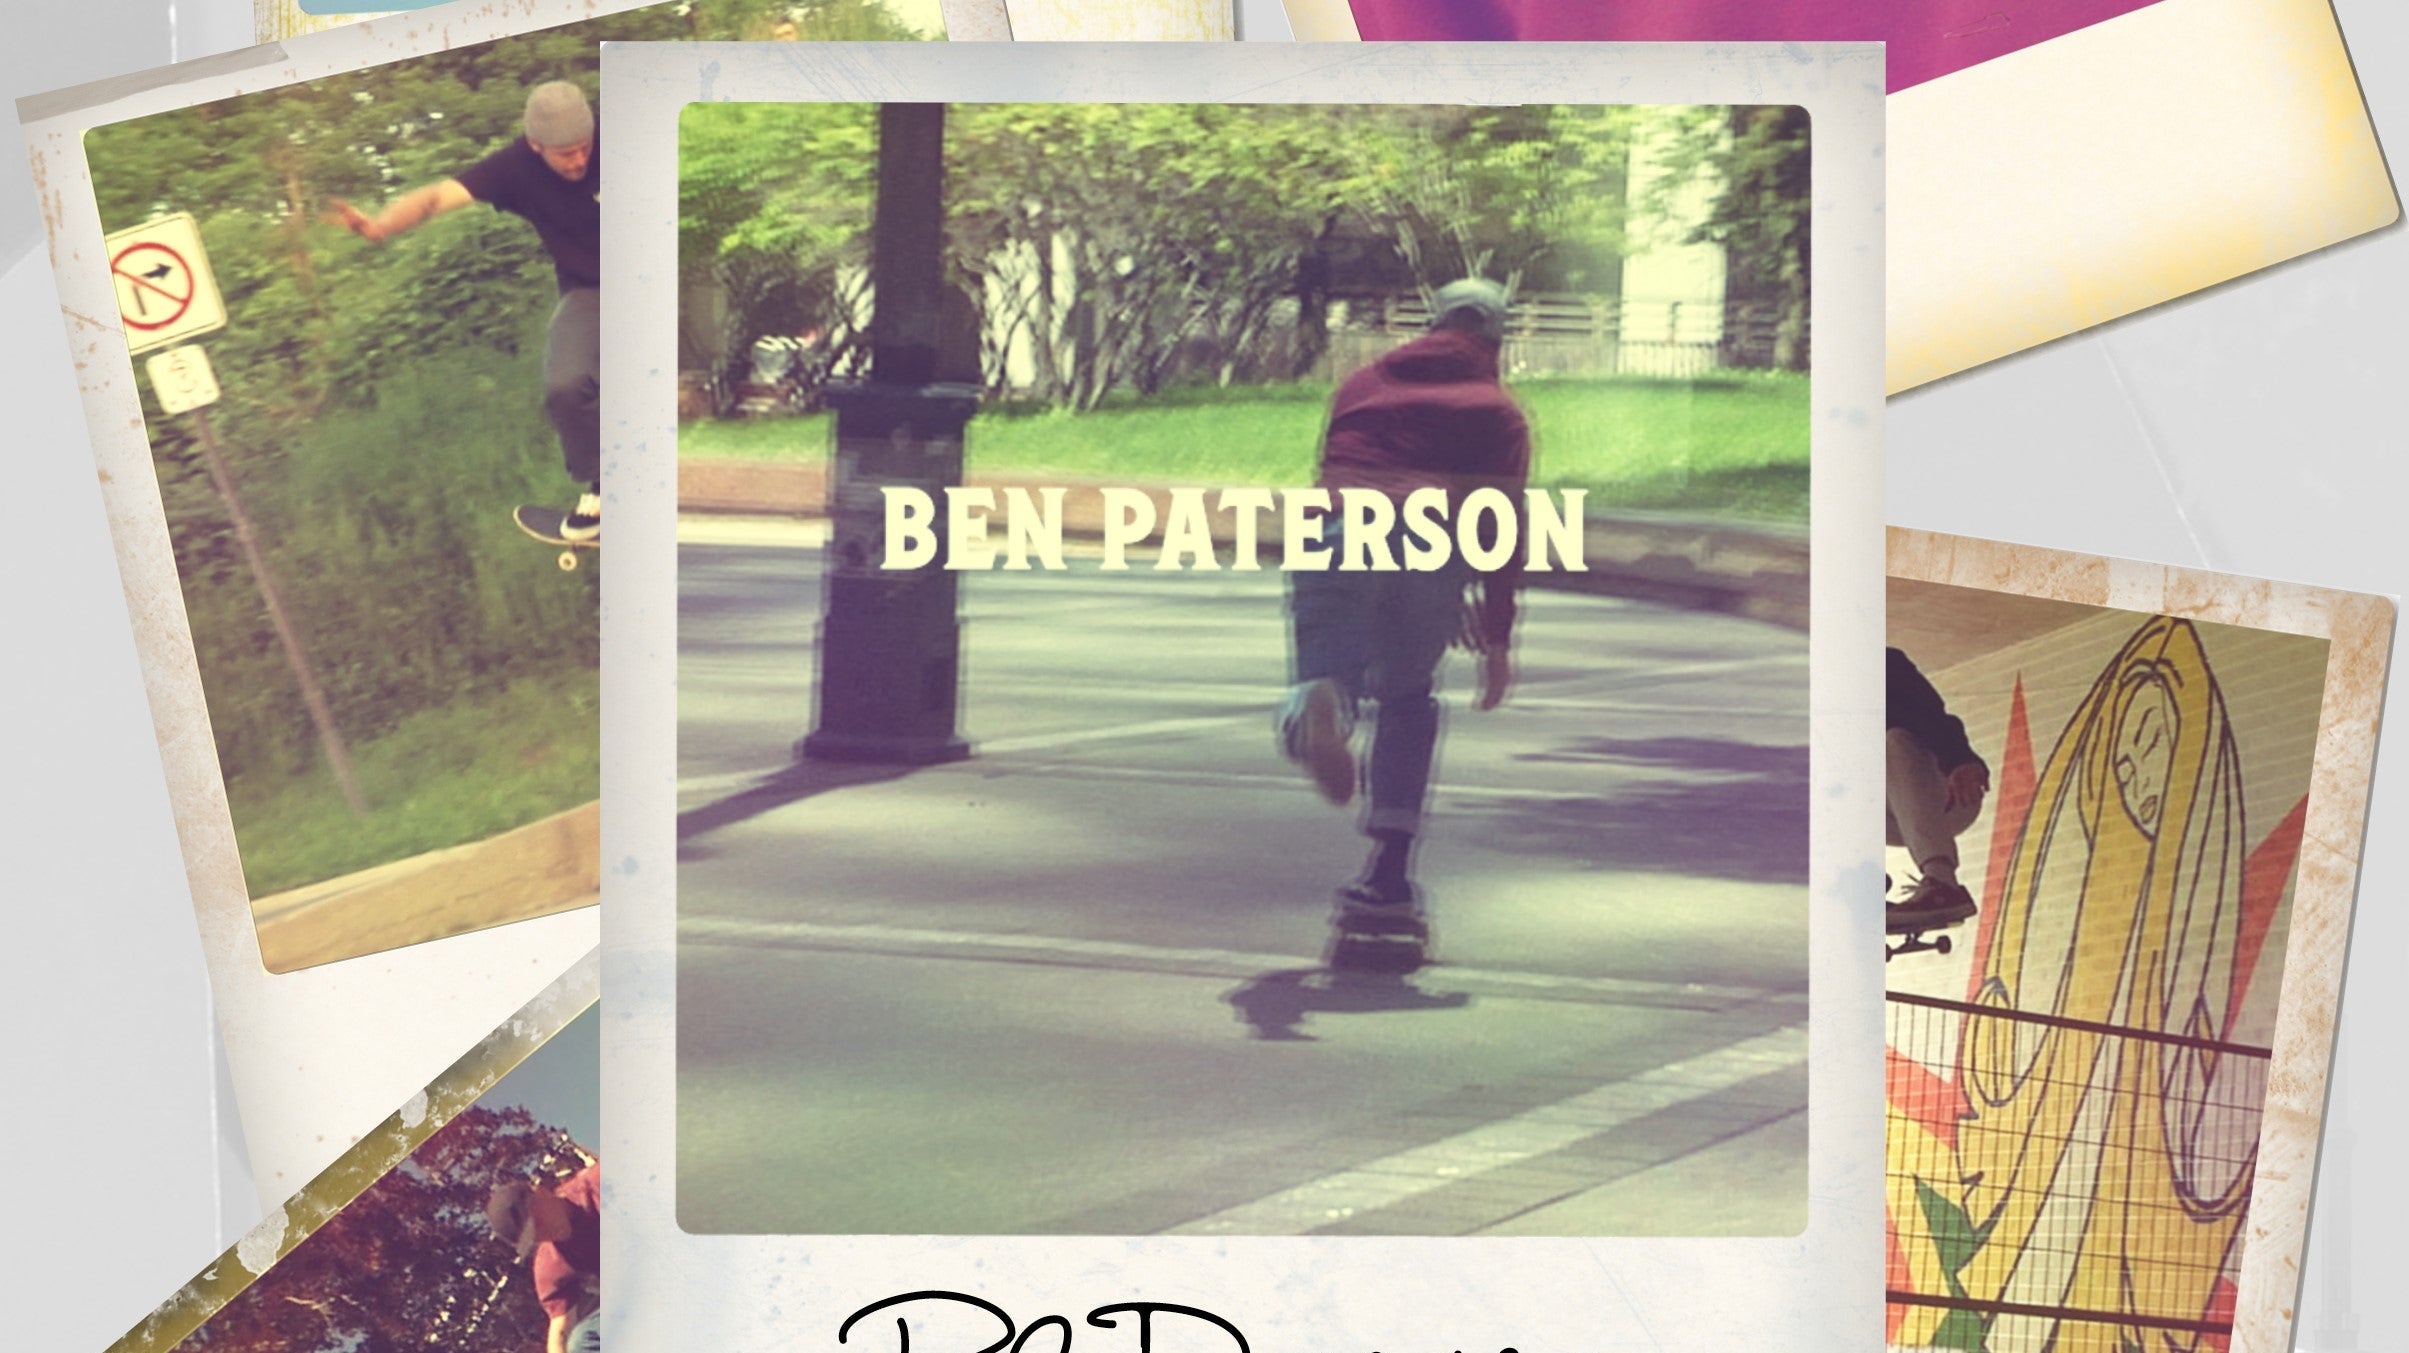 THE RED DRAGONS PROUDLY WELCOME BEN PATERSON TO THE TEAM!